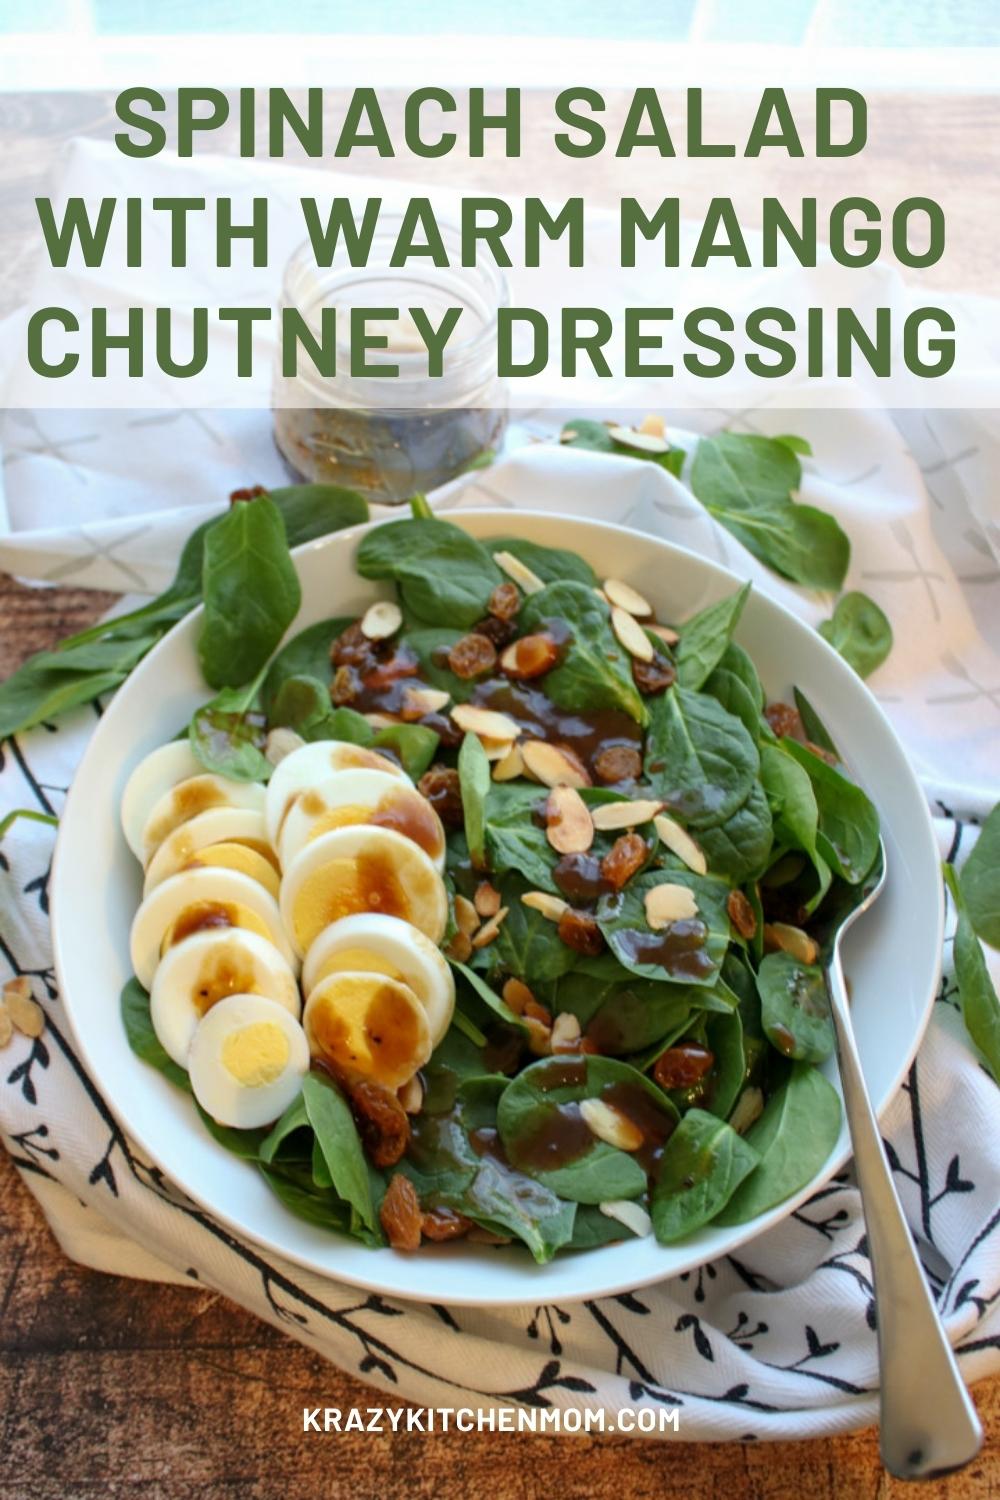 A variation of traditional Spinach Salad with Warm Bacon Dressing. For this recipe, I use jarred mango chutney for the base of the salad dressing. via @krazykitchenmom